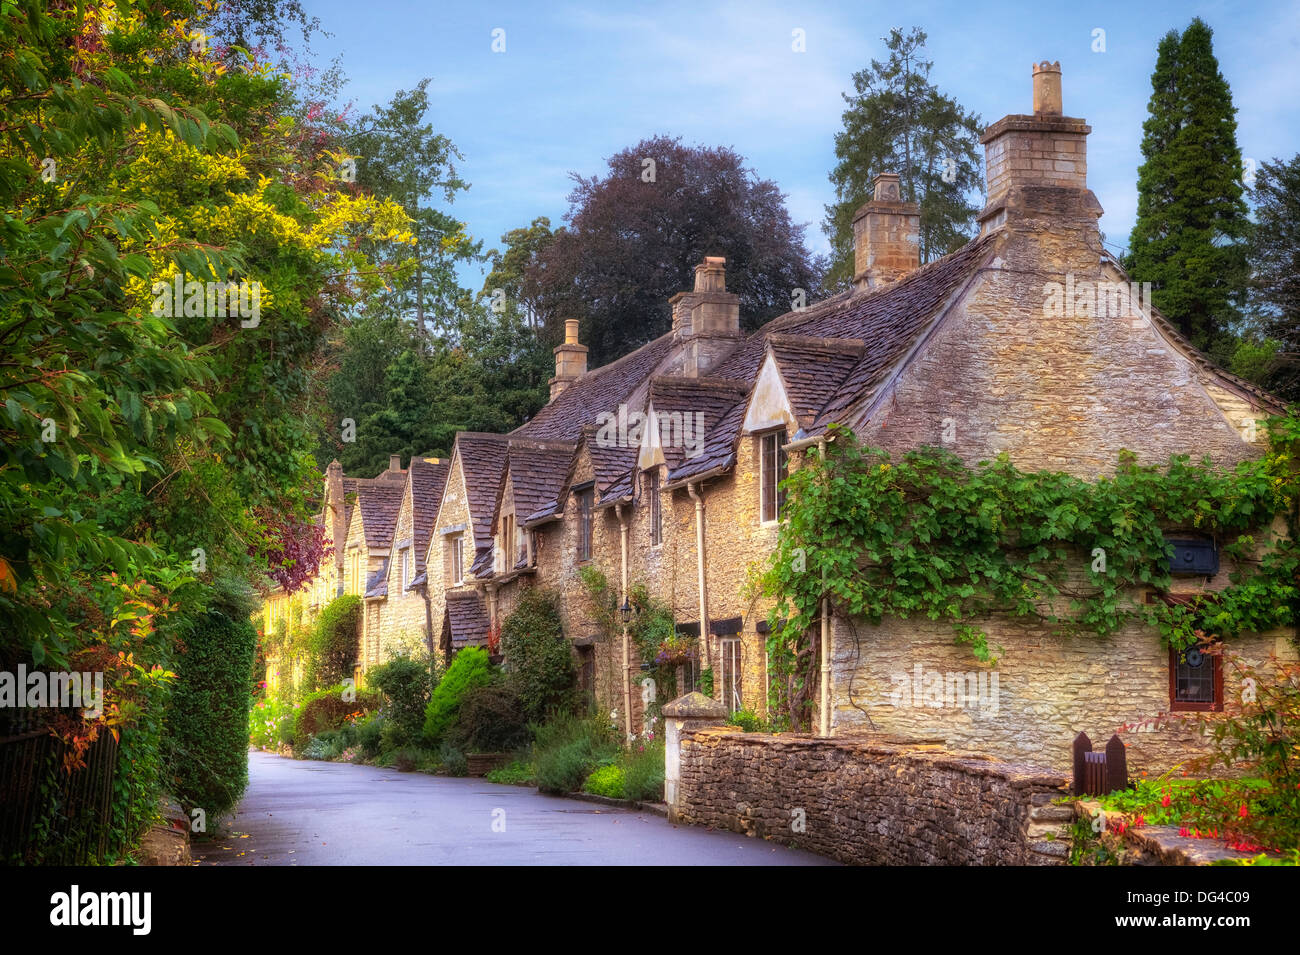 Castle Combe, Wiltshire, Angleterre, Royaume-Uni Banque D'Images